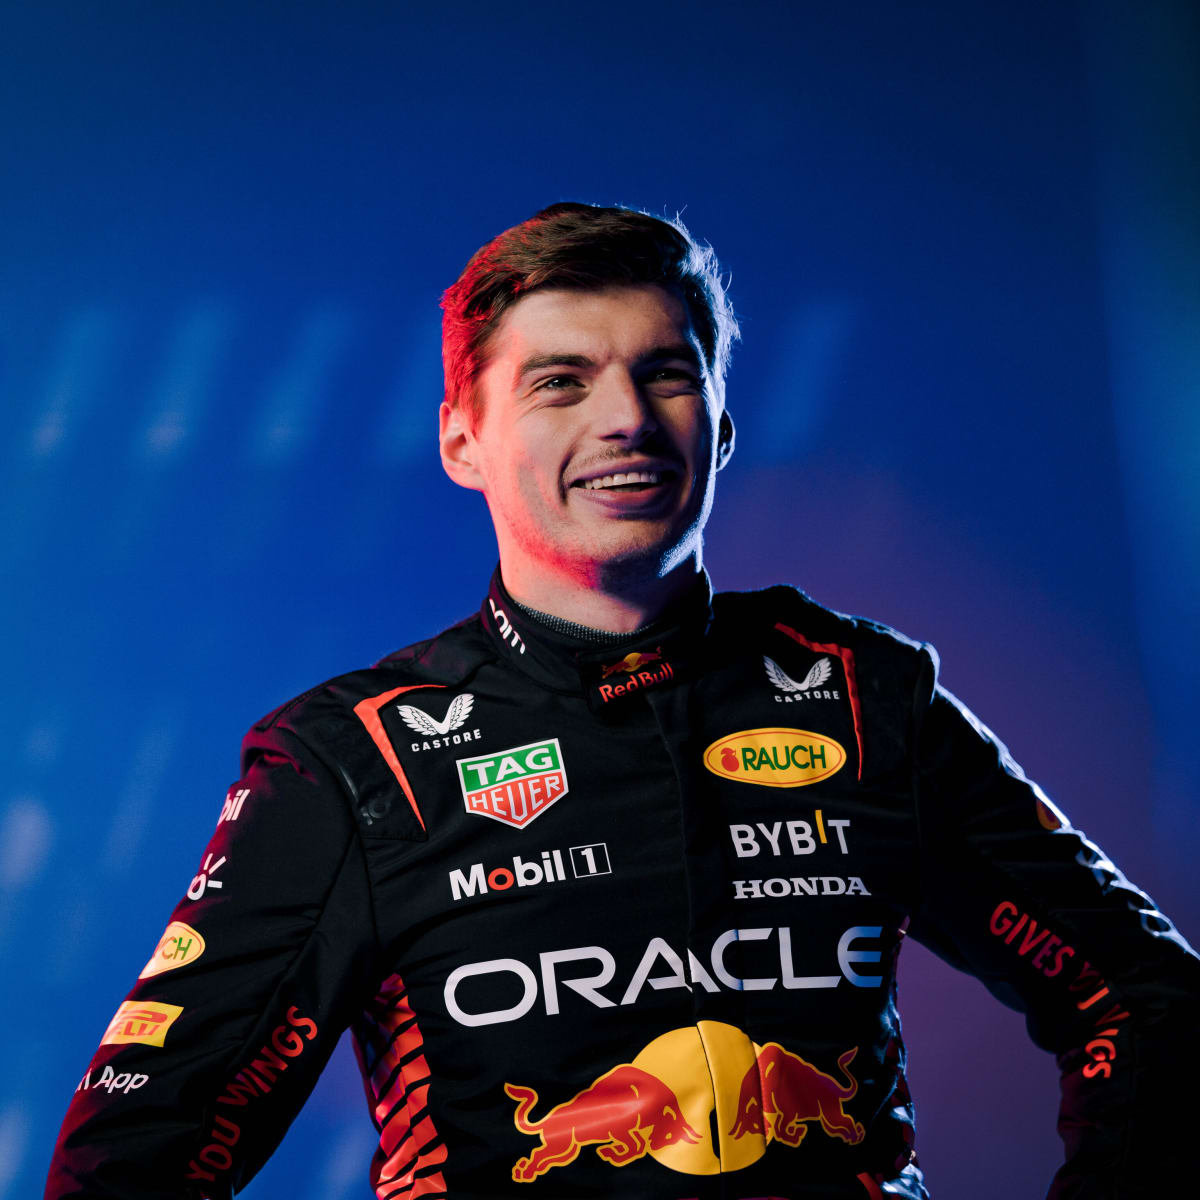 kern knuffel trompet F1 News: Max Verstappen Opens Up On Drive To Survive Season 5 Return - F1  Briefings: Formula 1 News, Rumors, Standings and More